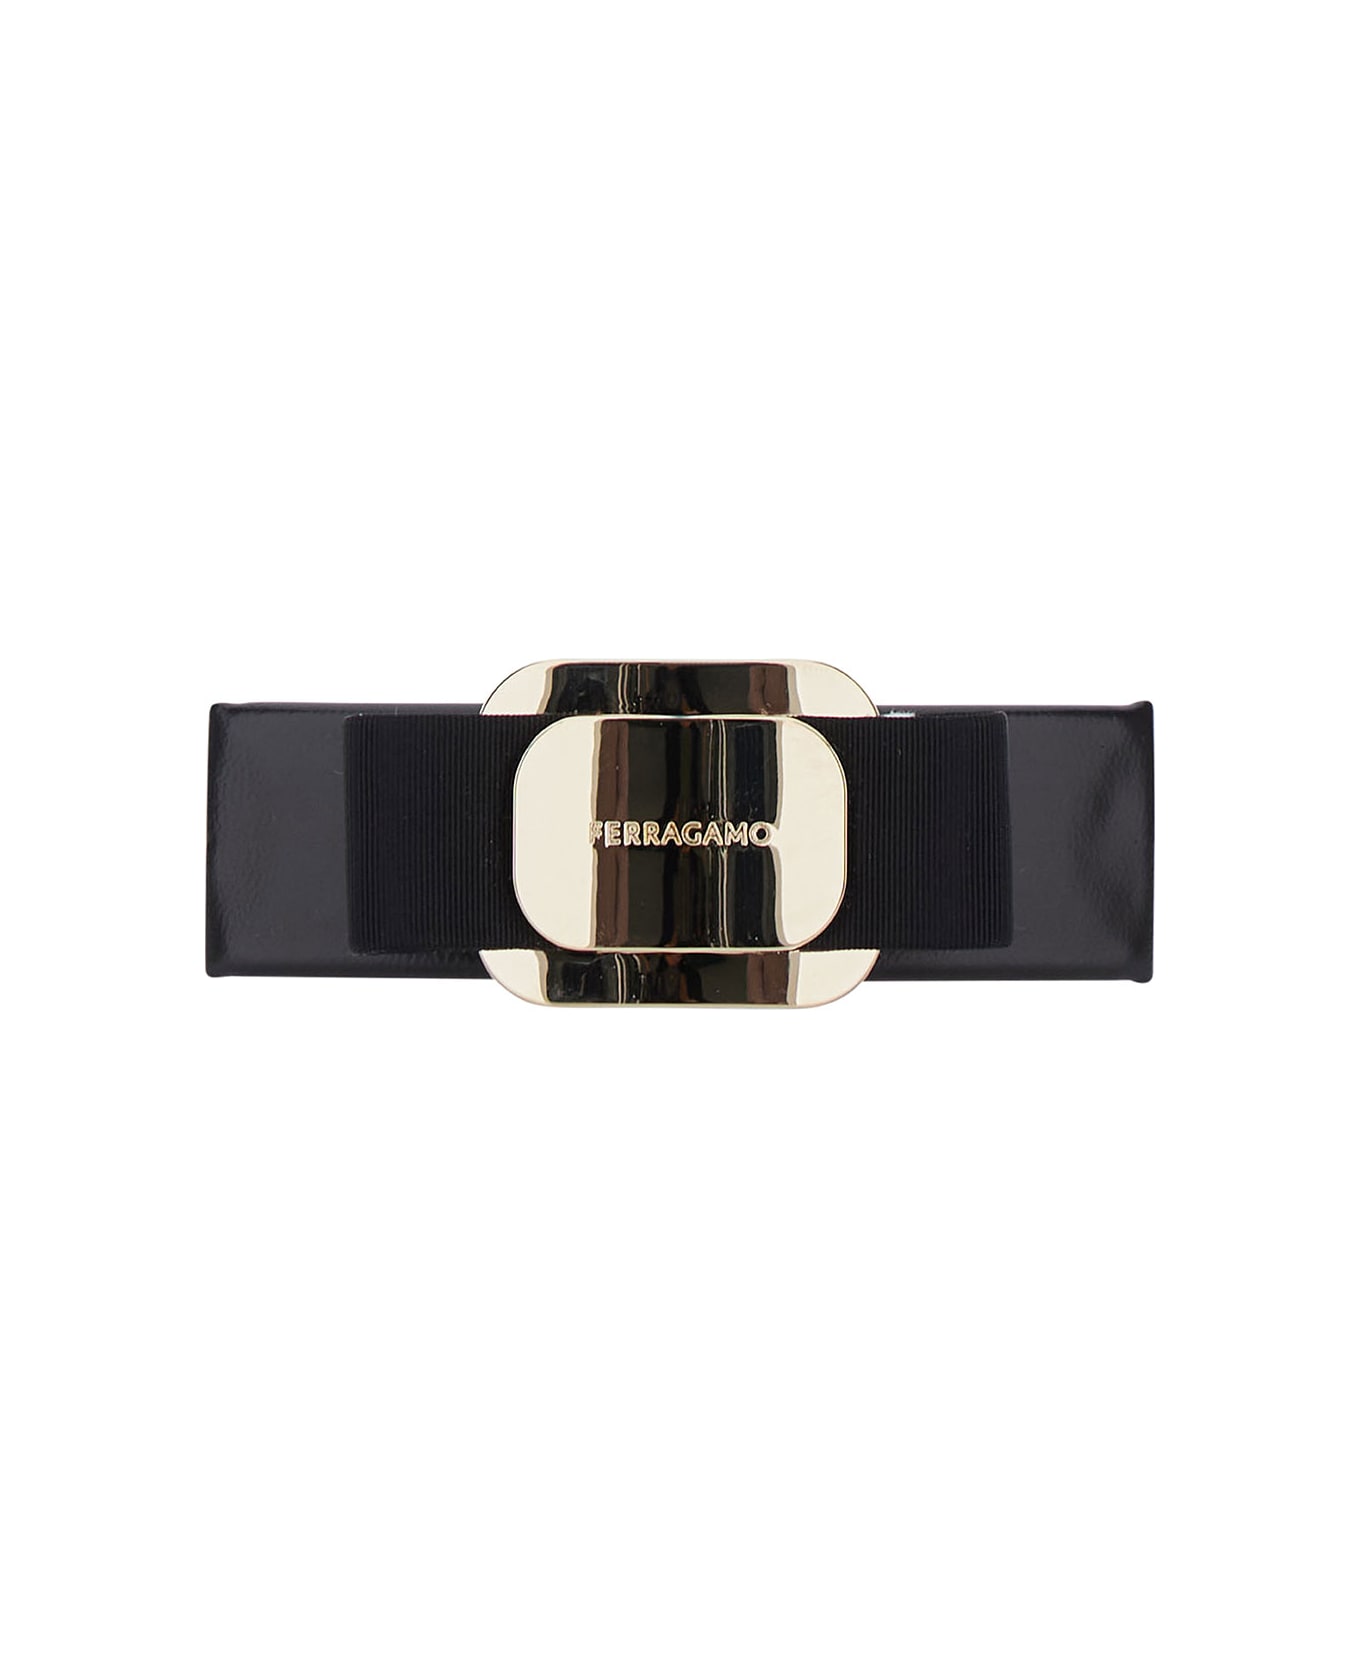 Ferragamo Black Hairclip With Vara Bow In Leather Blend Woman - NERO